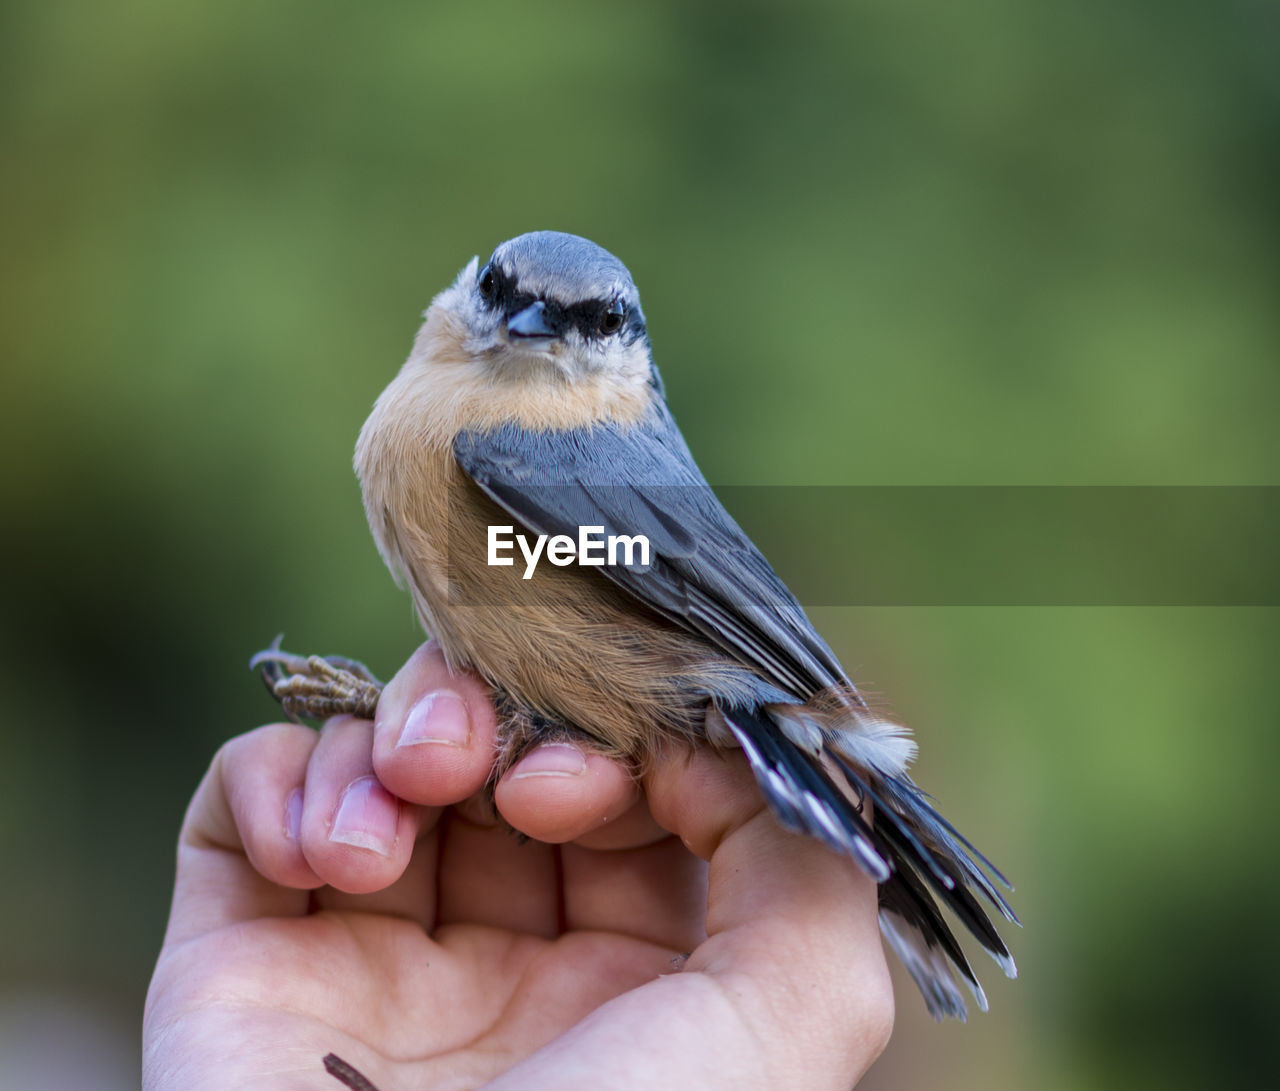 CLOSE-UP OF A BIRD PERCHING ON HAND HOLDING A BLURRED BACKGROUND